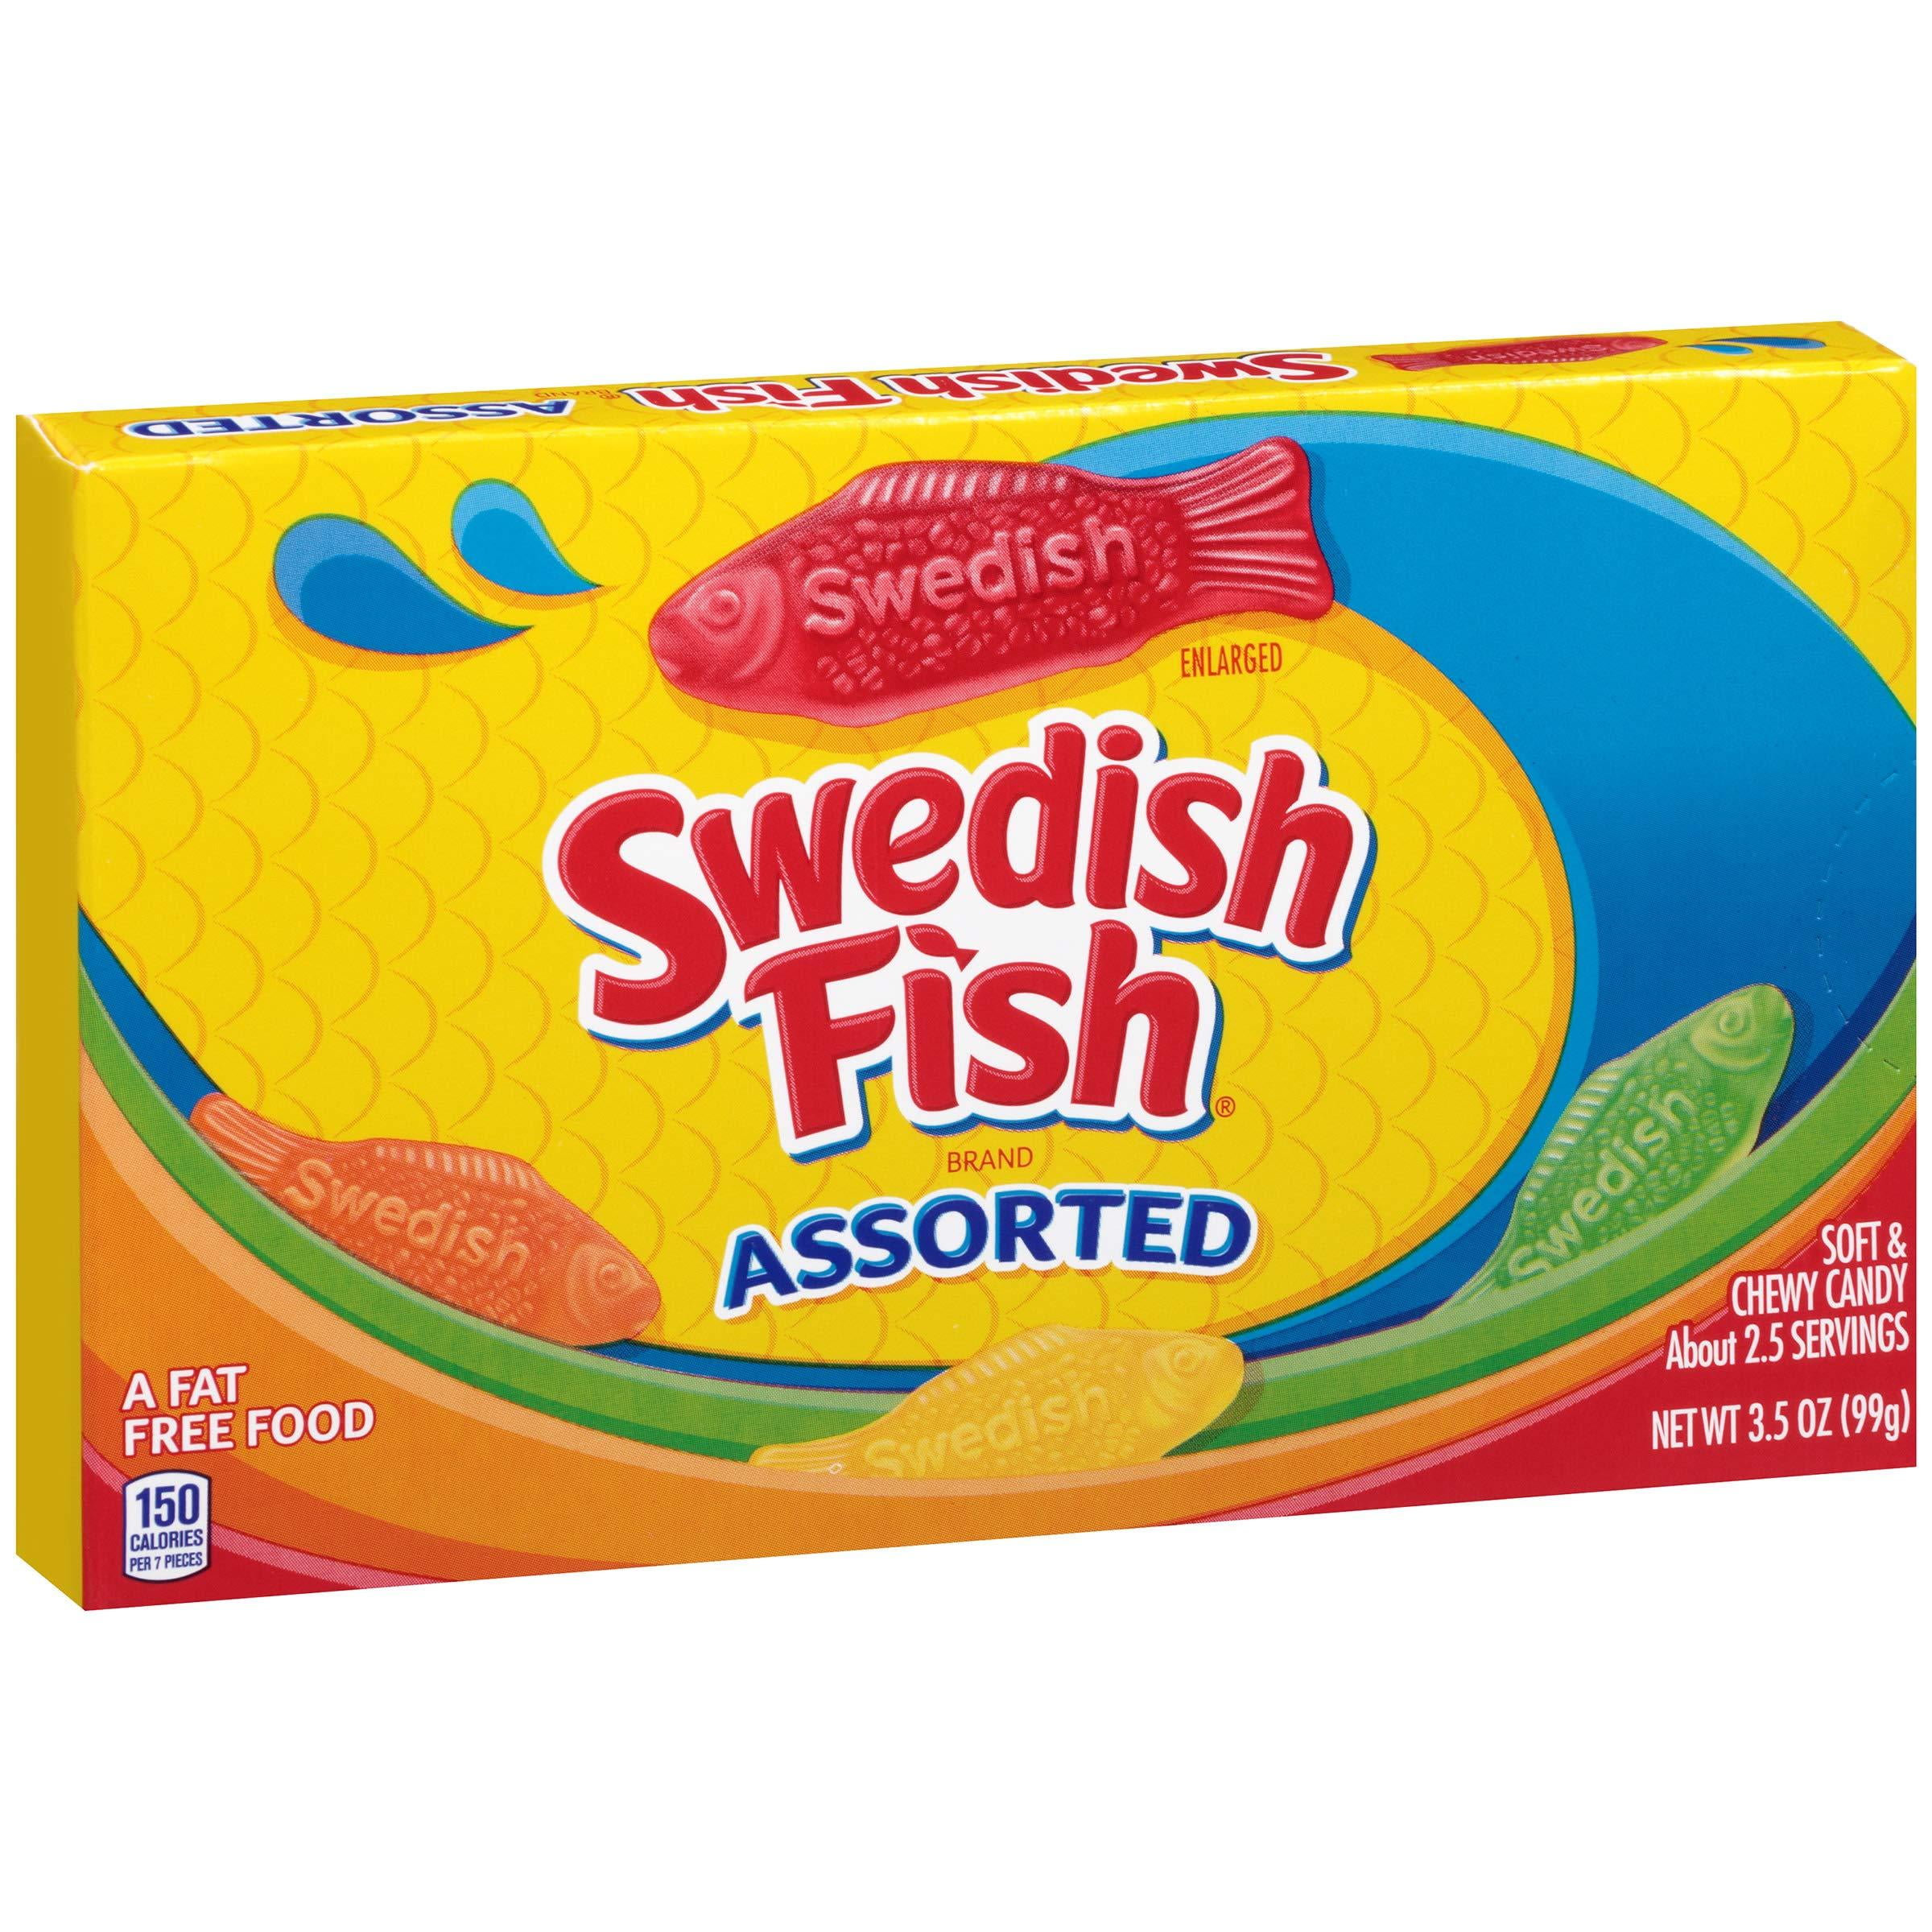 Swedish Fish Assorted Soft & Chewy Candy - 3.5-oz. Theater Box